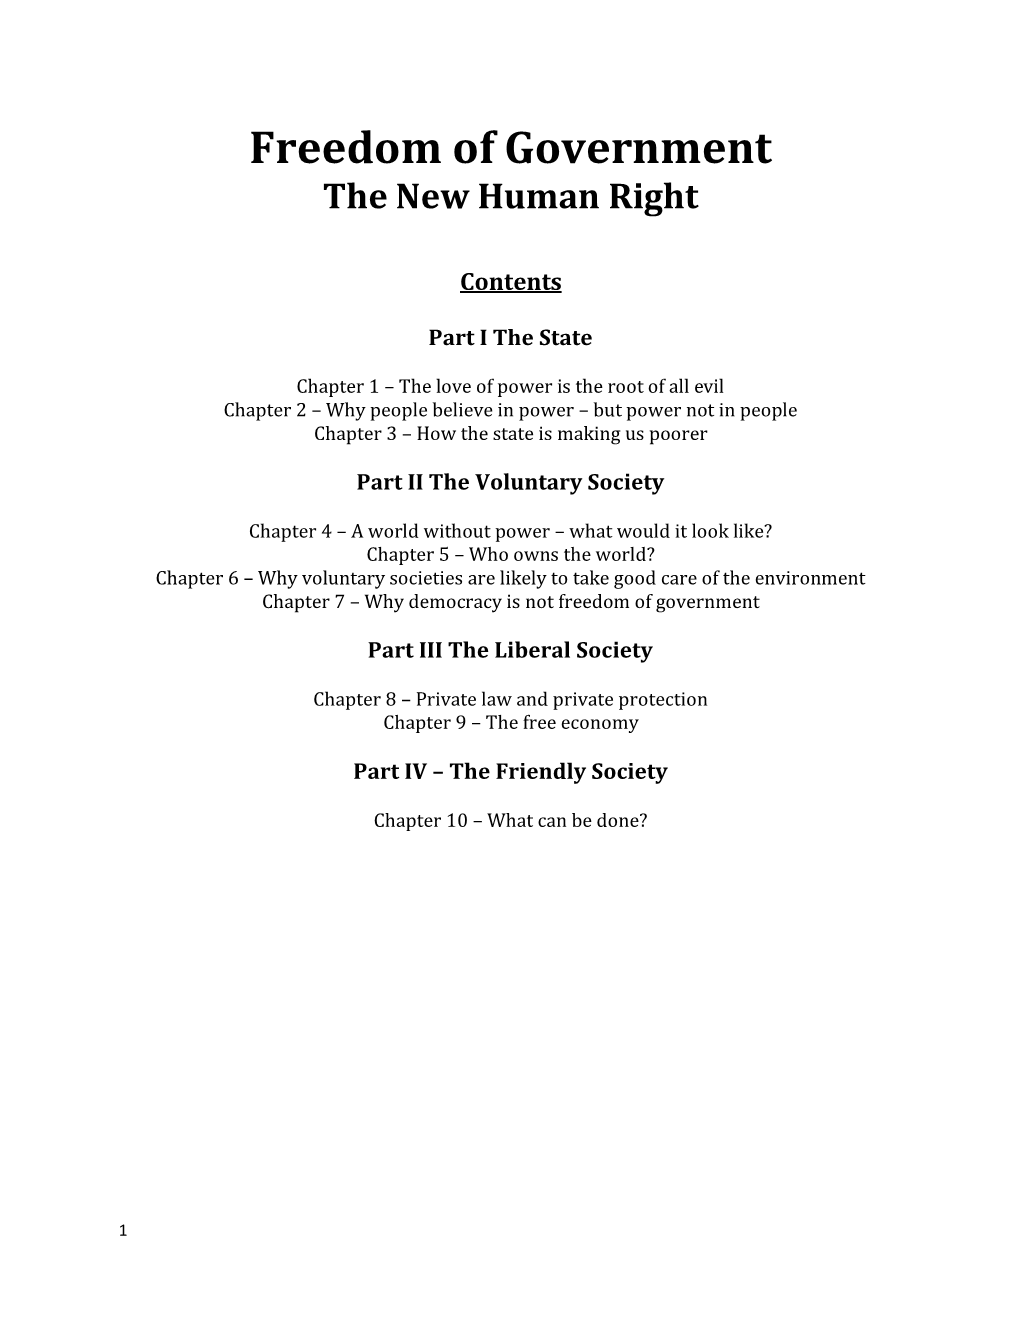 Freedom of Government the New Human Right